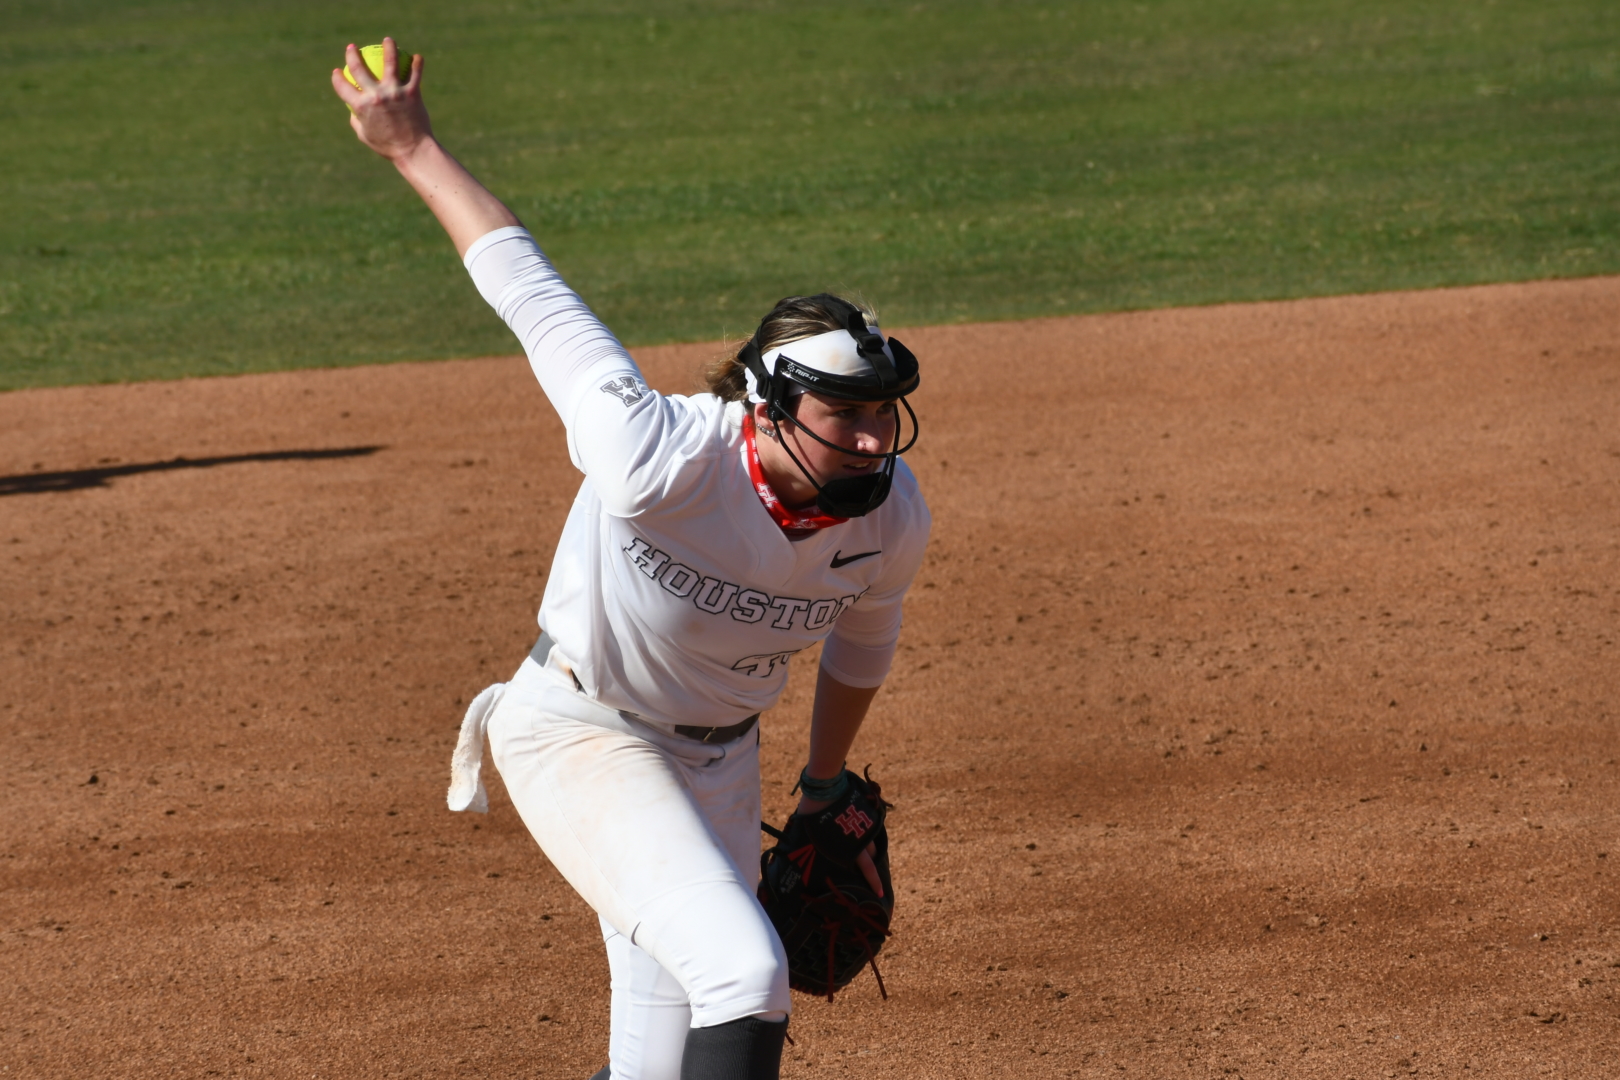 UH softball snapped a six-game losing streak with a series victory over ECU, winning three of the four games over the weekend at Cougar Softball Stadium. | Courtesy of UH athletics